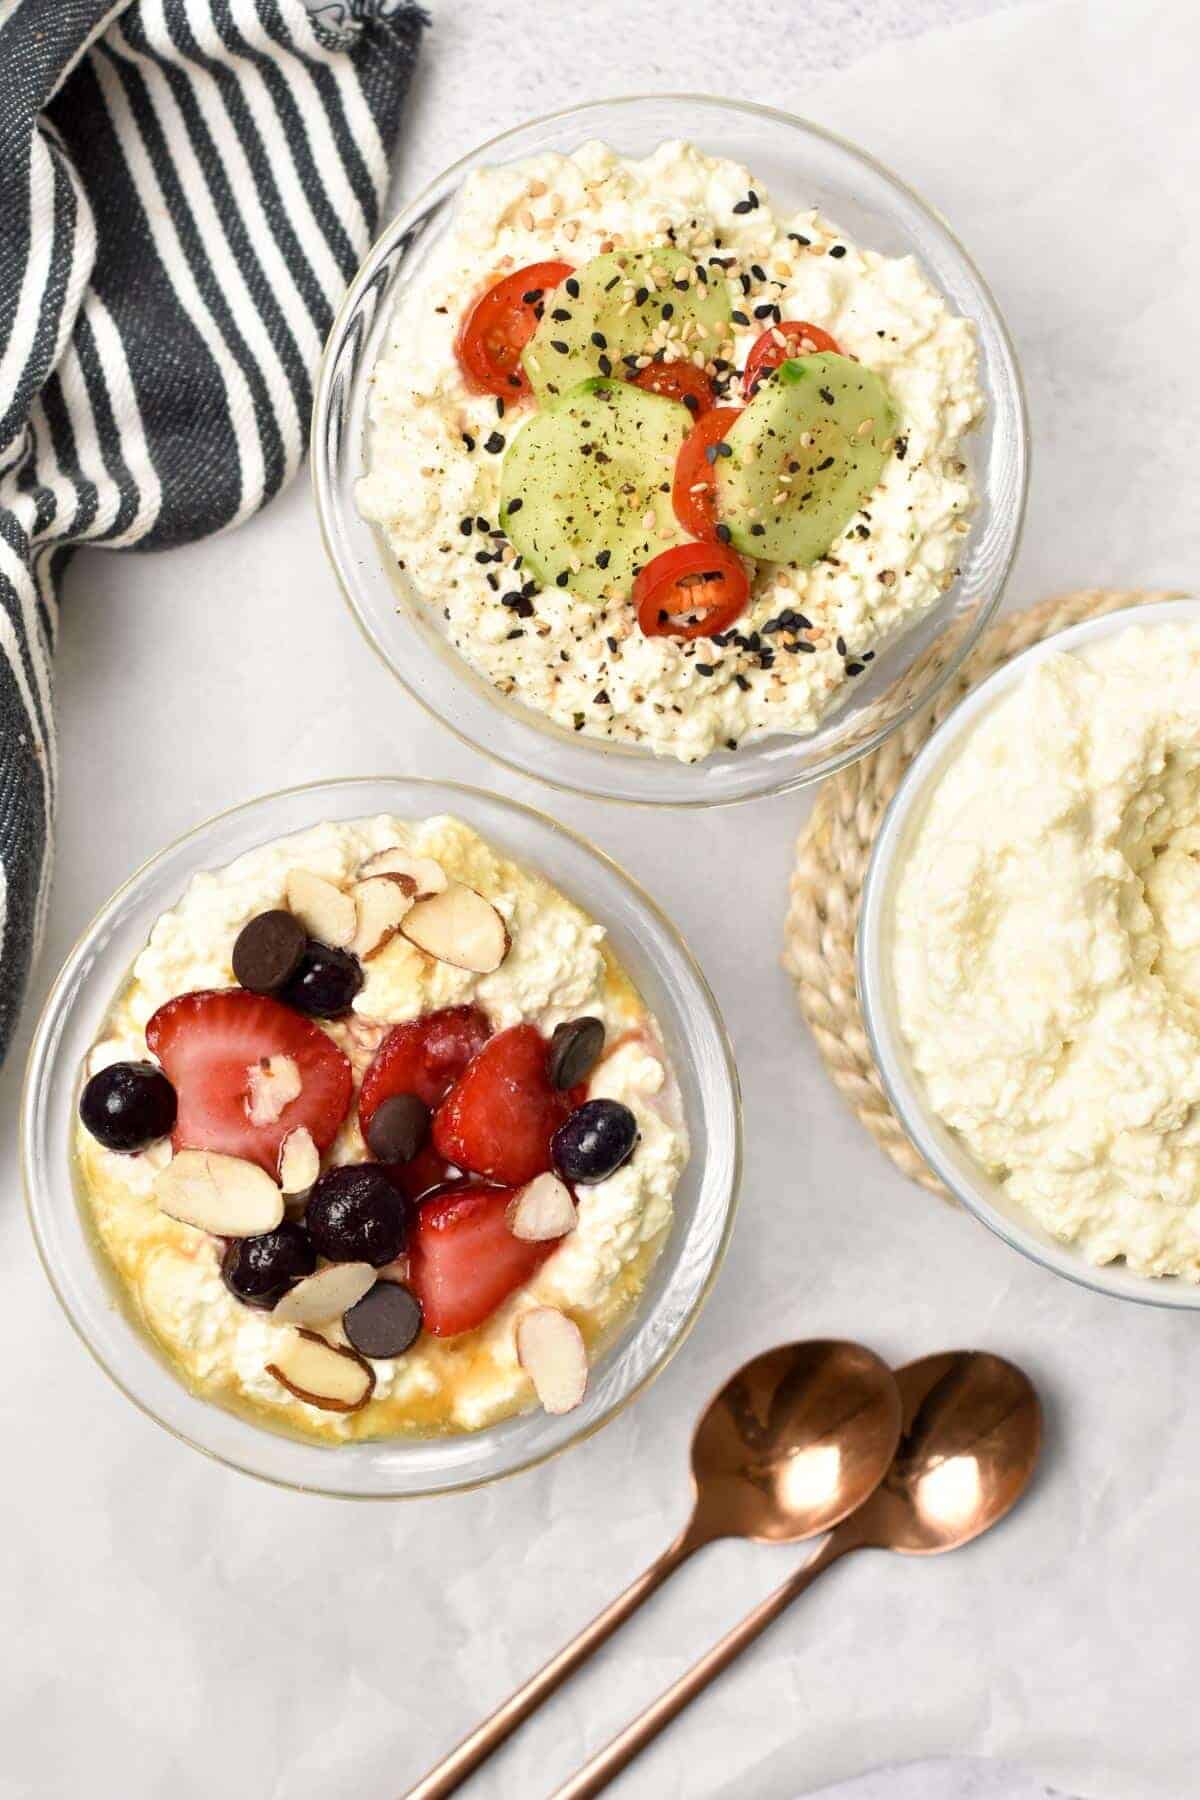 Three glass bowls filled with vegan cottage cheese and various fruit and vegetable toppings on a white background and accented by copper spoons and a gray and white striped towel.